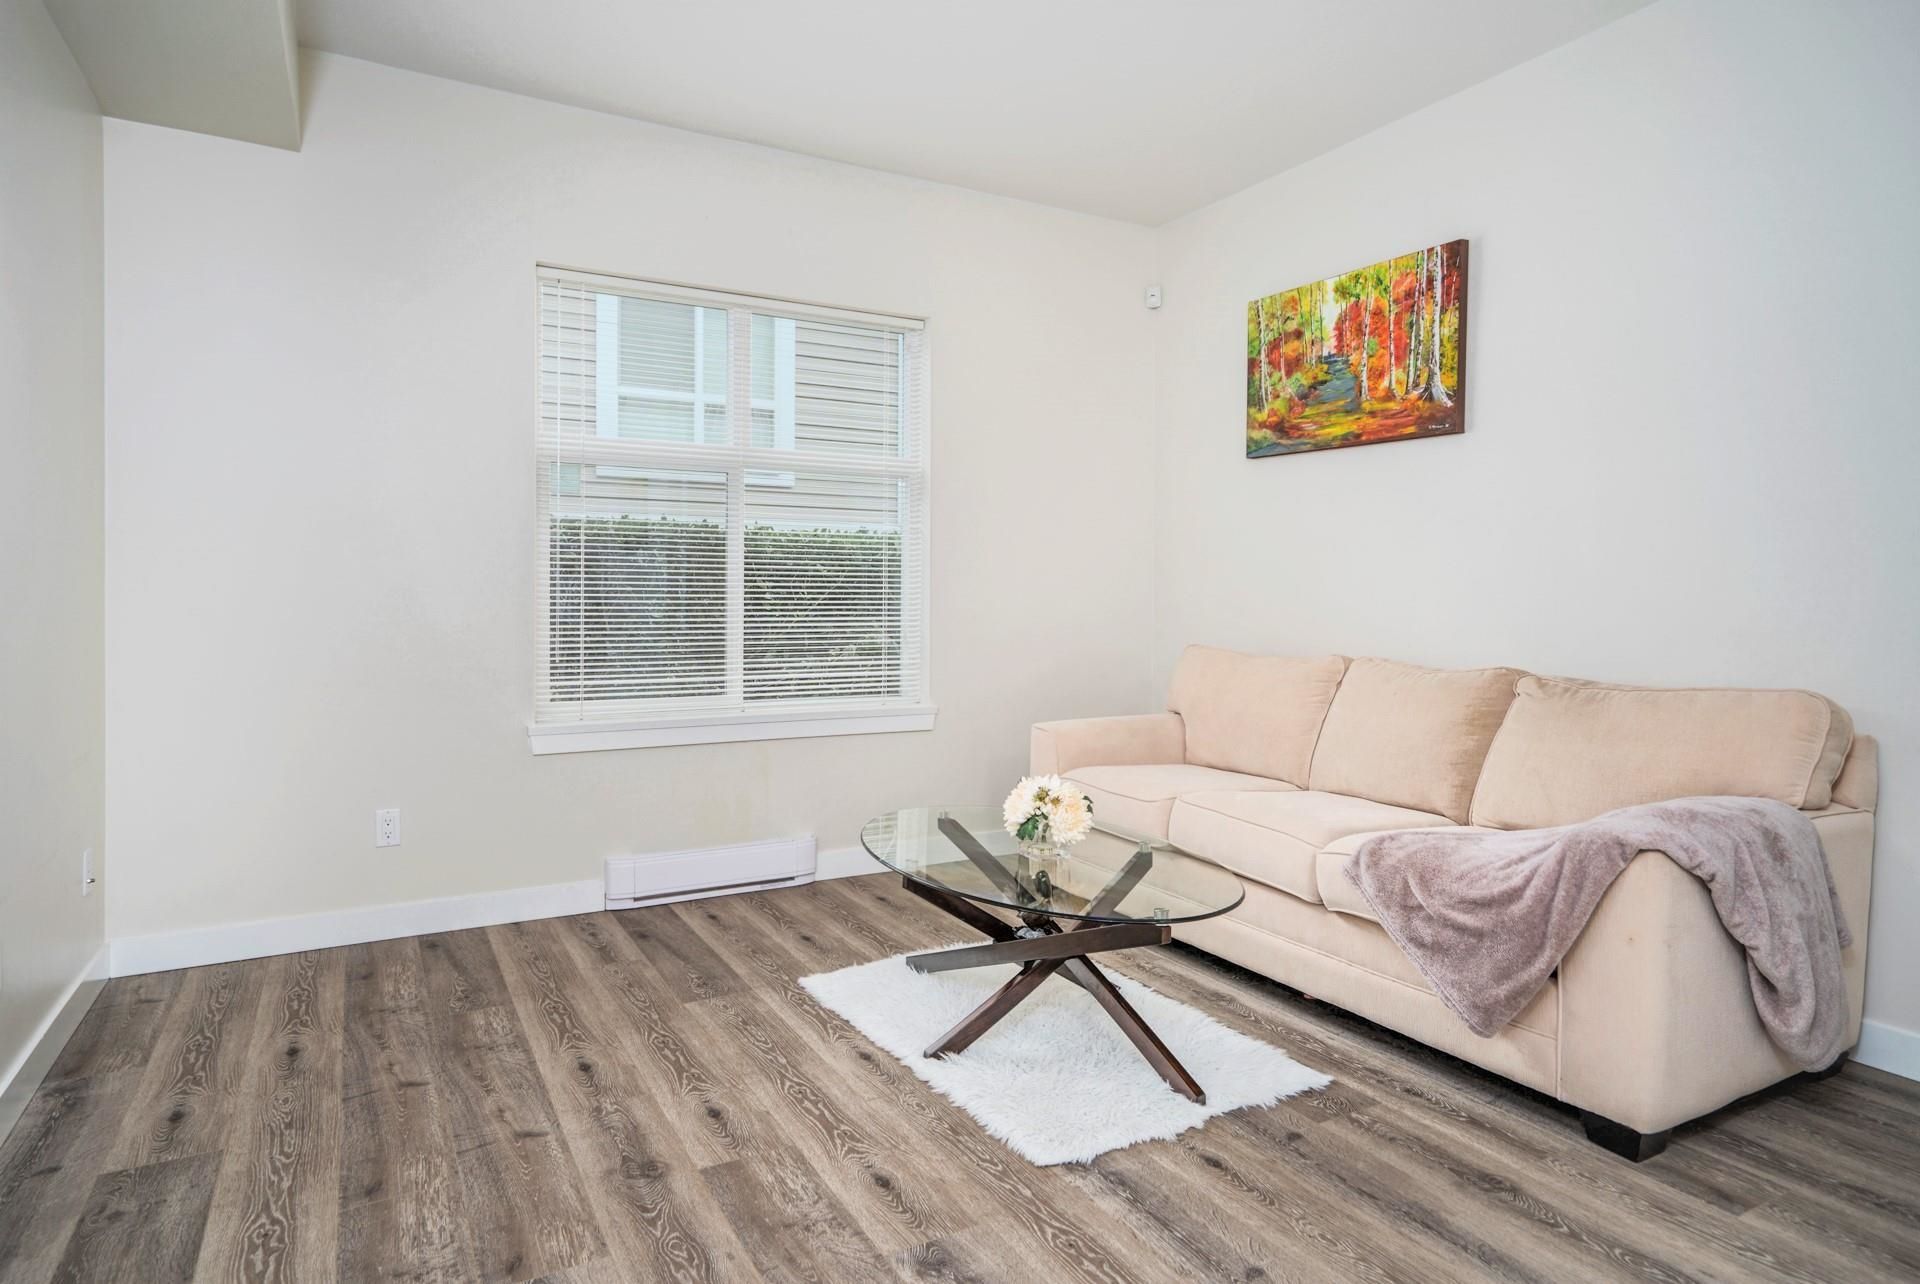 Photo 6: Photos: 323 618 LANGSIDE Avenue in Coquitlam: Coquitlam West Townhouse for sale : MLS®# R2625947